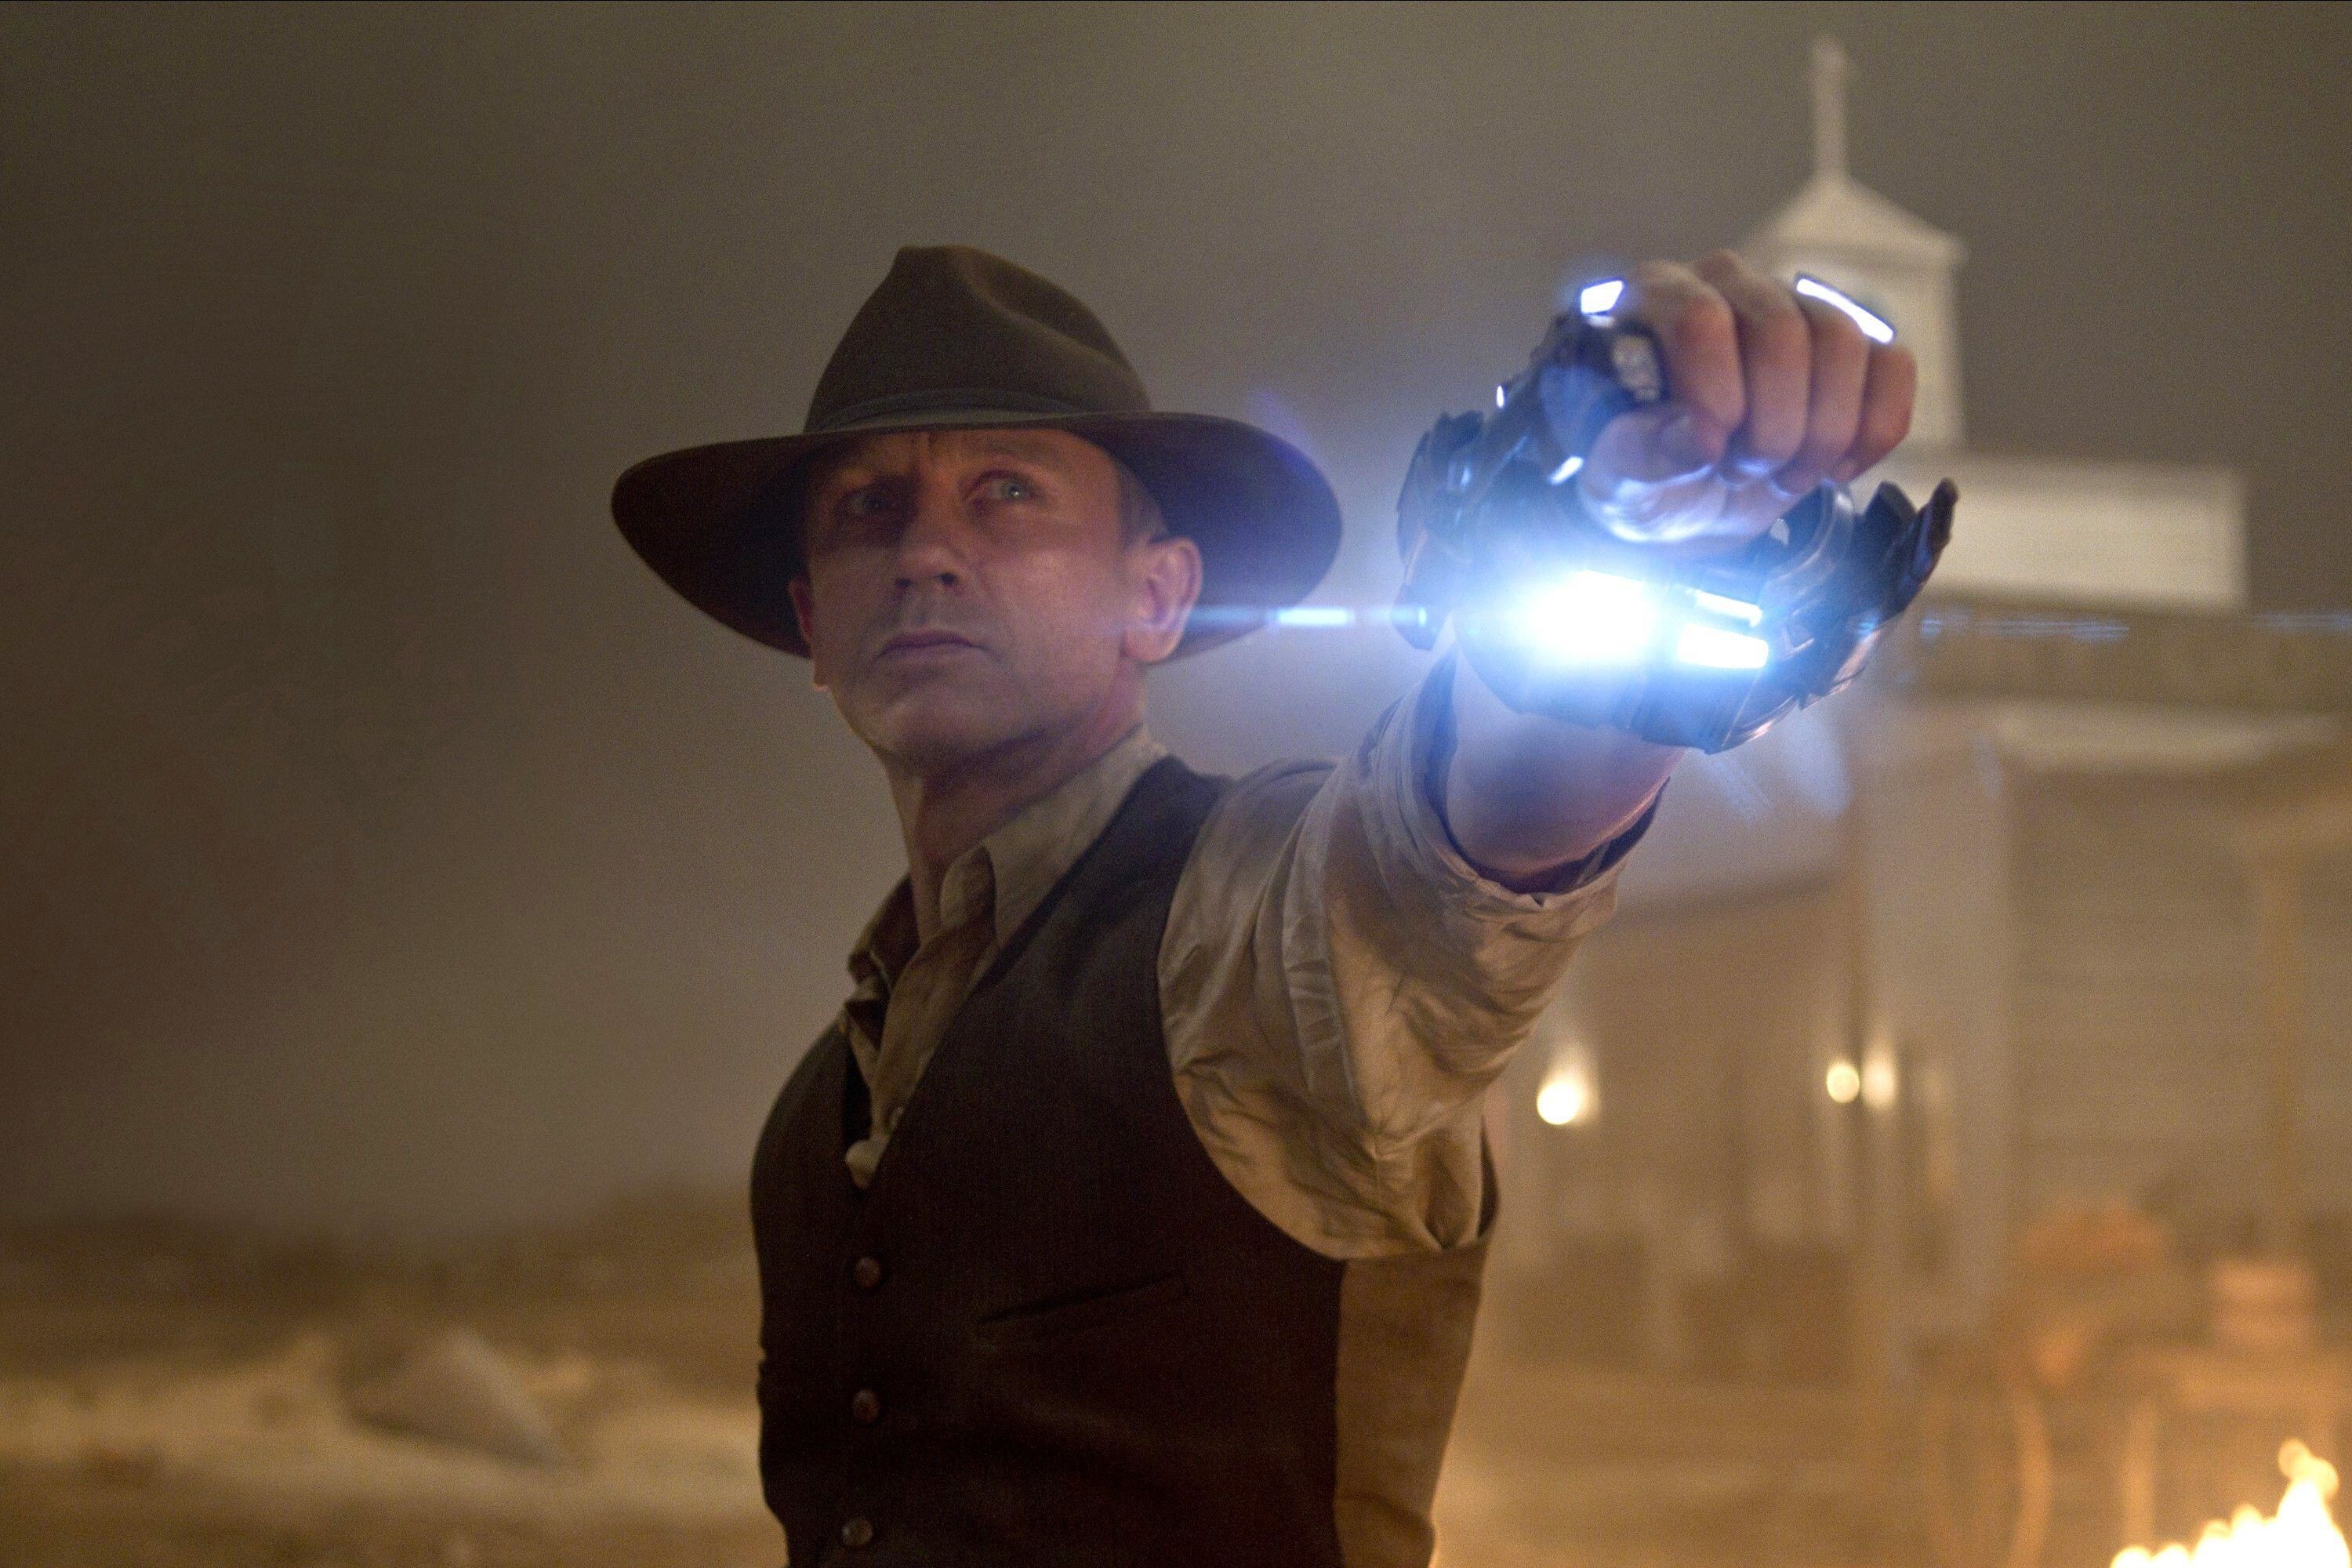 A stoic cowboy holds up a glowing extraterrestrial weapon